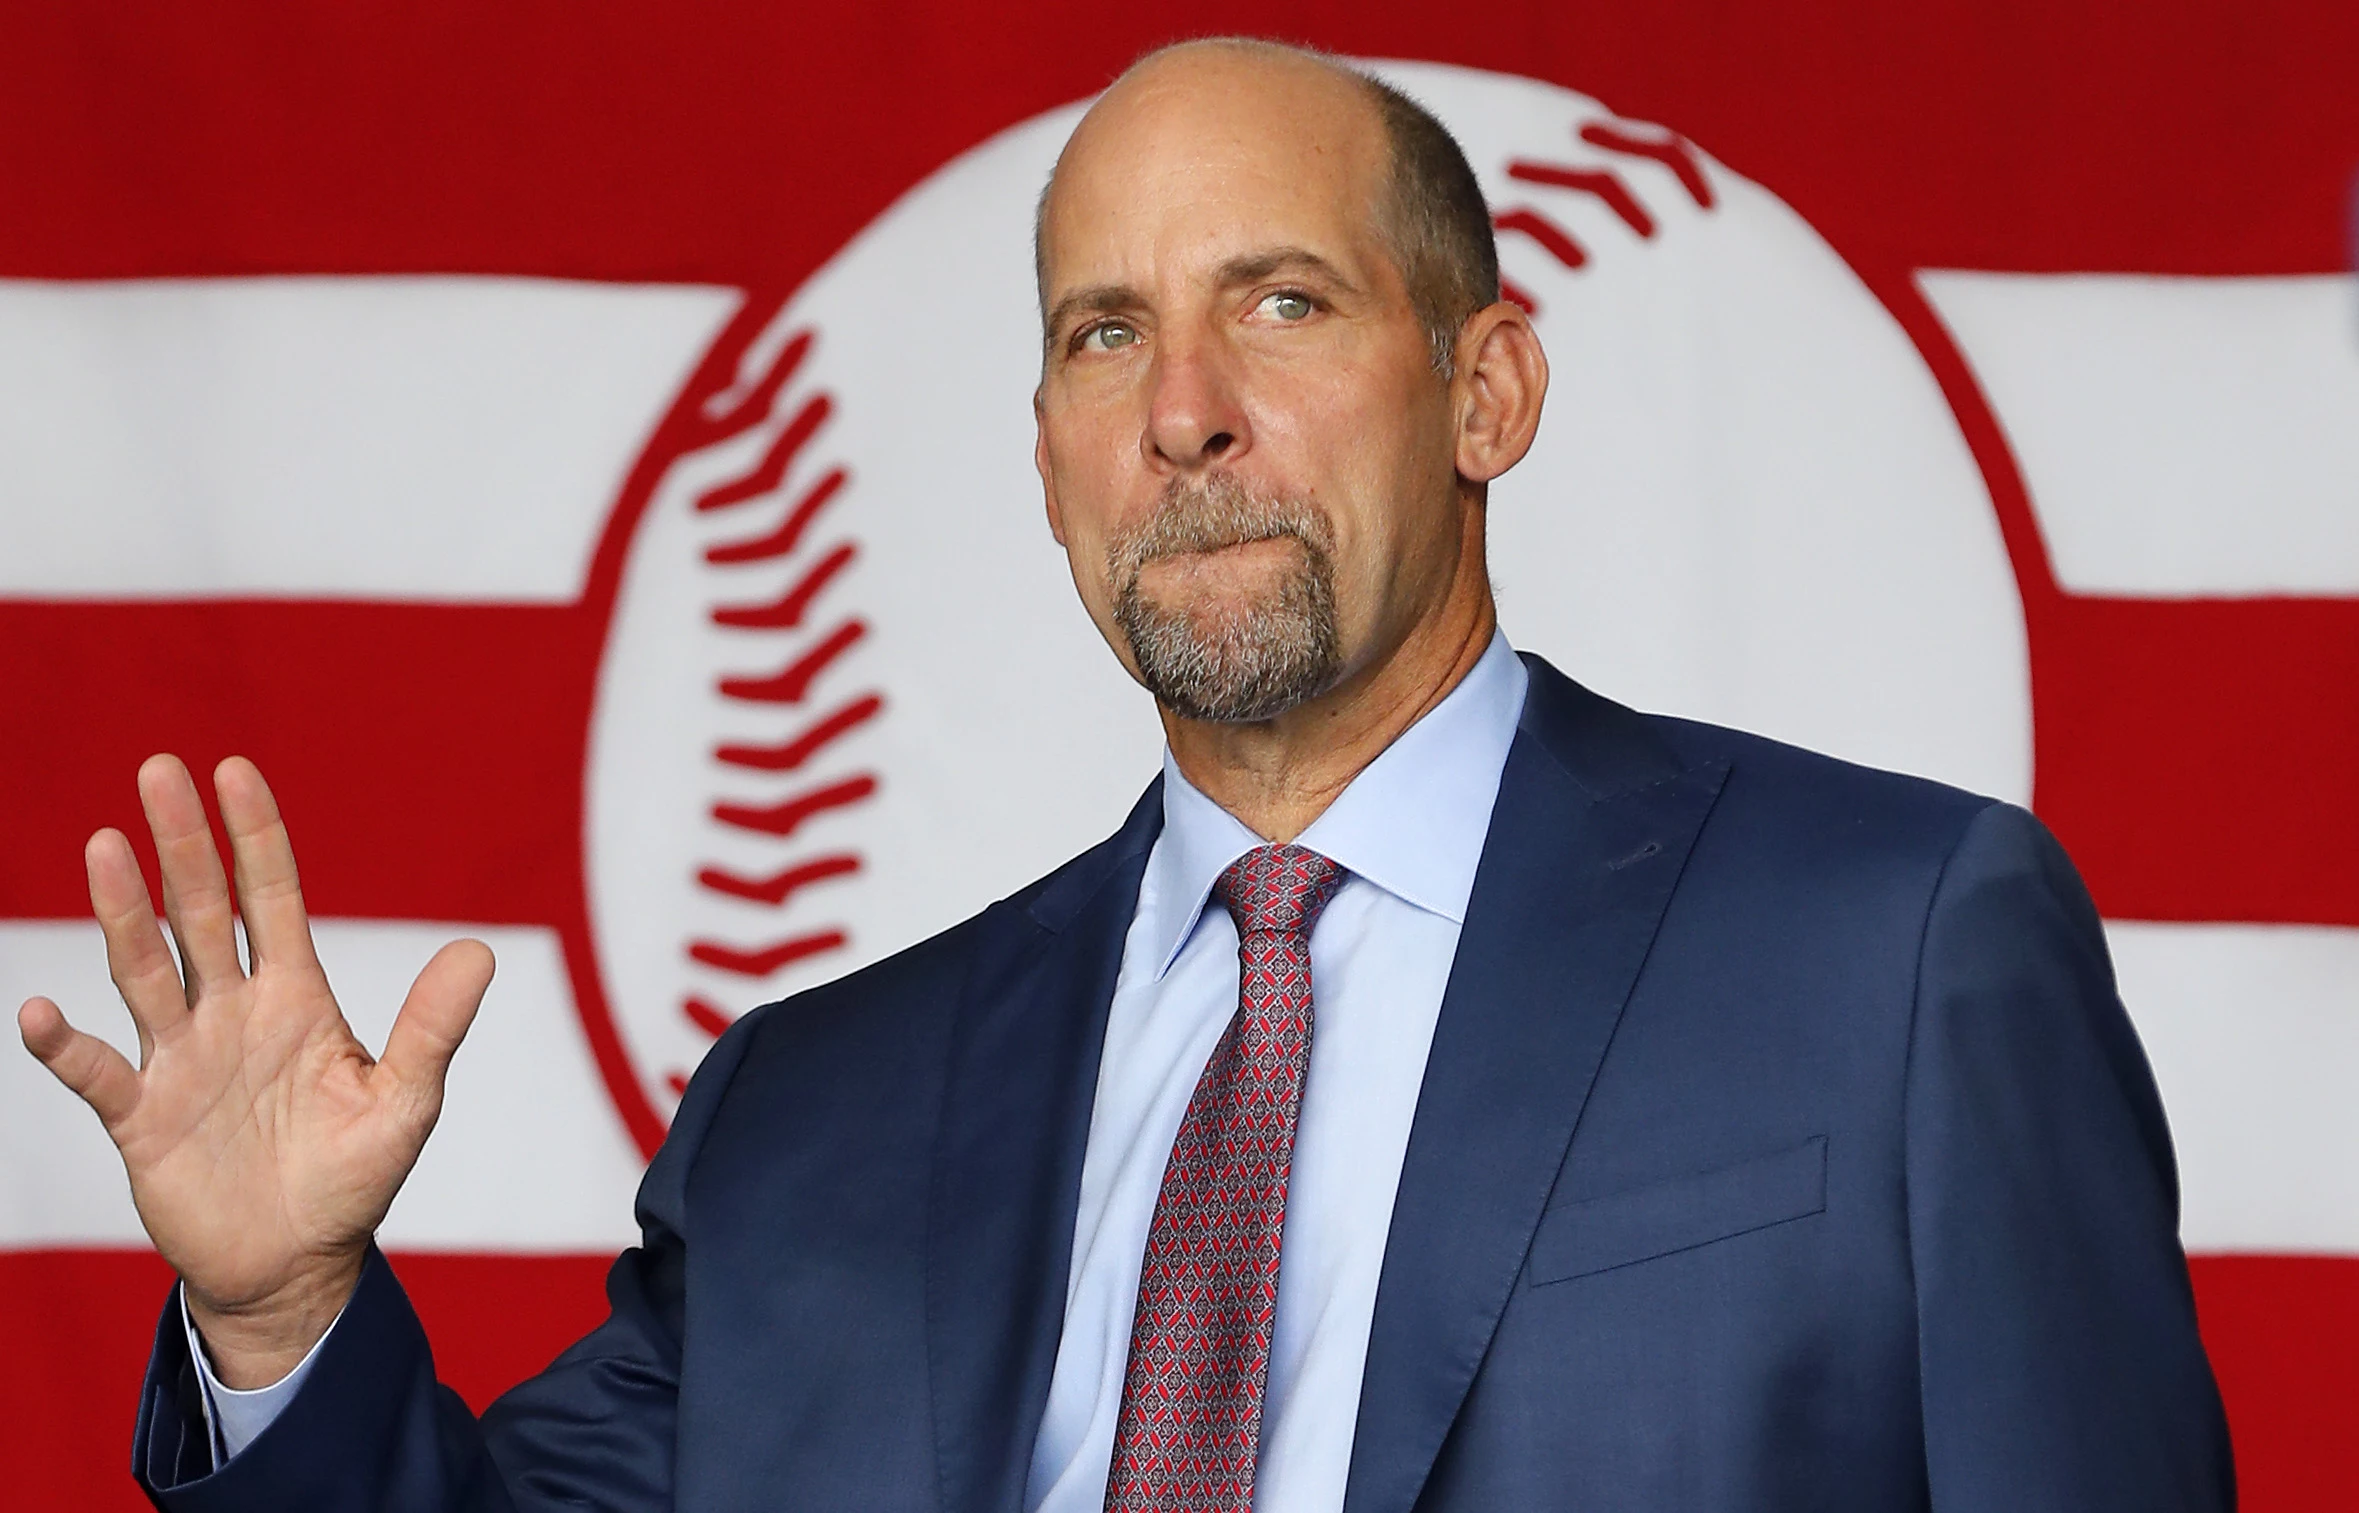 John Smoltz on the lack moves of by the Yankees, the state of the